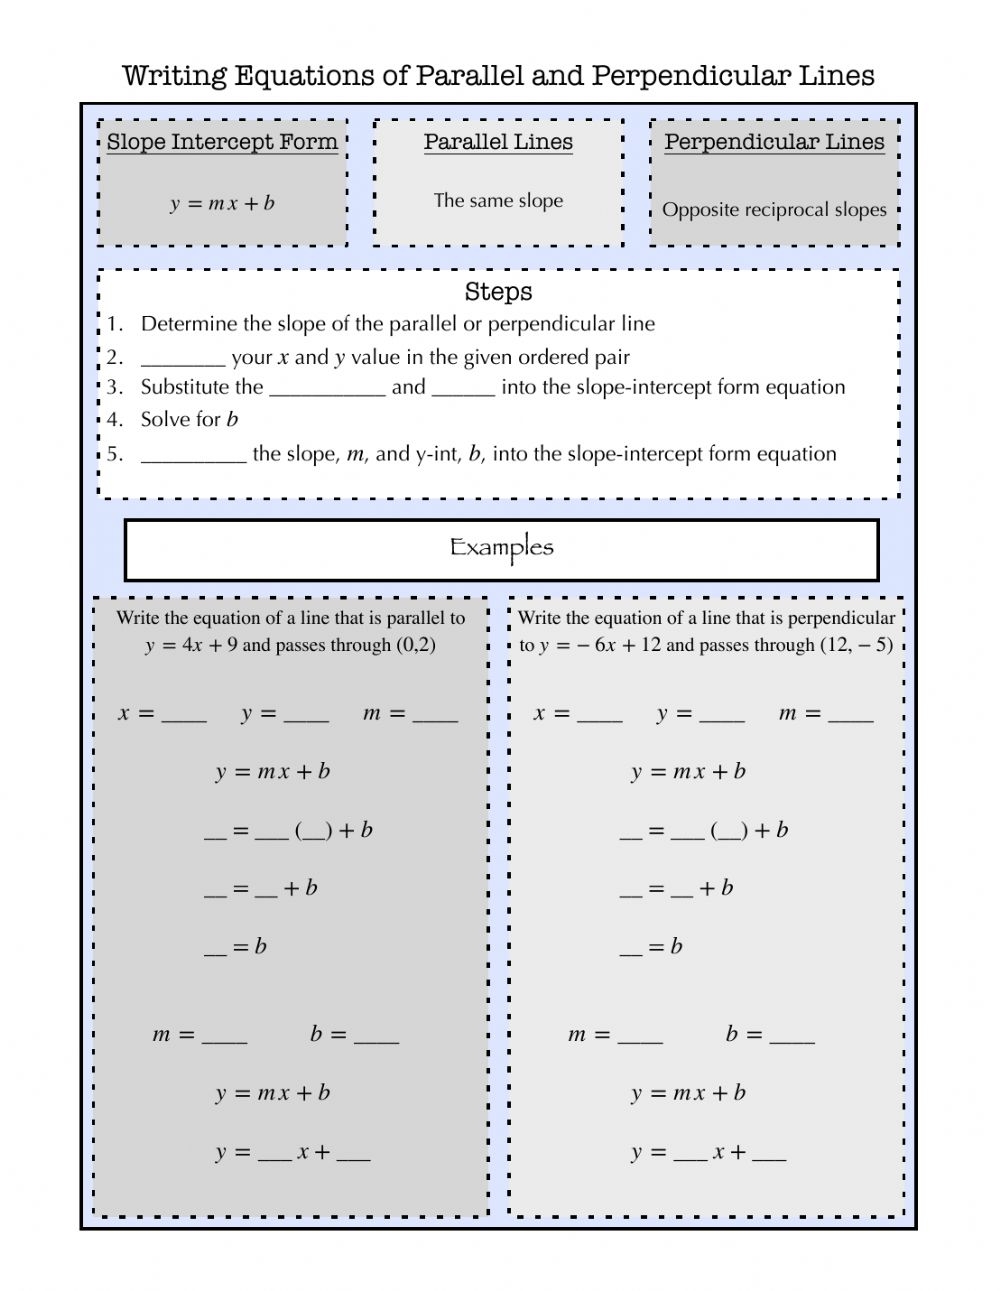 Writing Equations Of Parallel And Perpendicular Lines Notes Worksheet